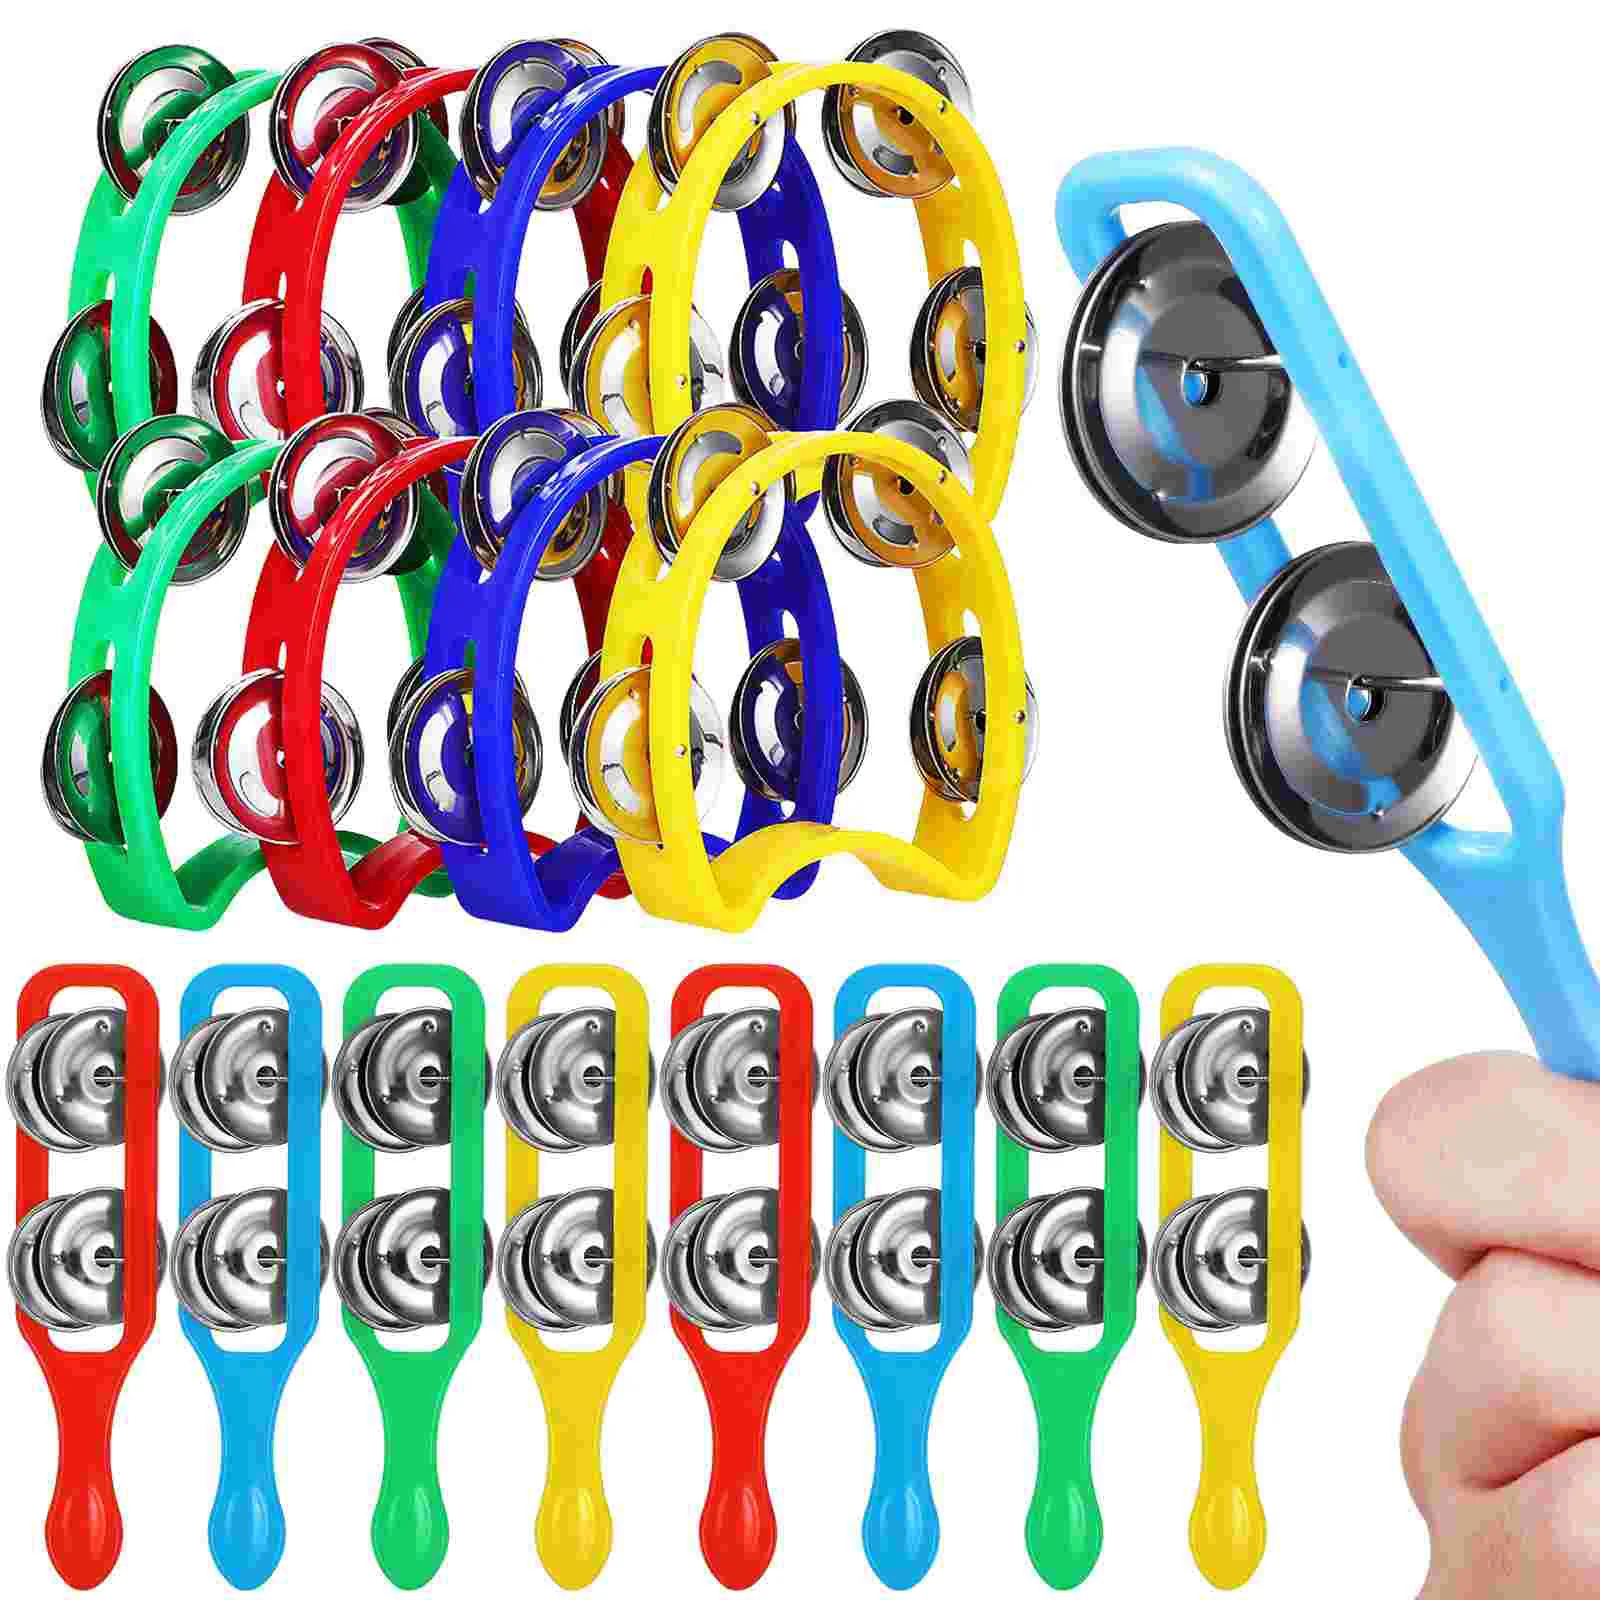 

16 Pcs Musical Instrument Kids Percussion Tambourine Adult Toy Professional Noise Makers Hand Bell